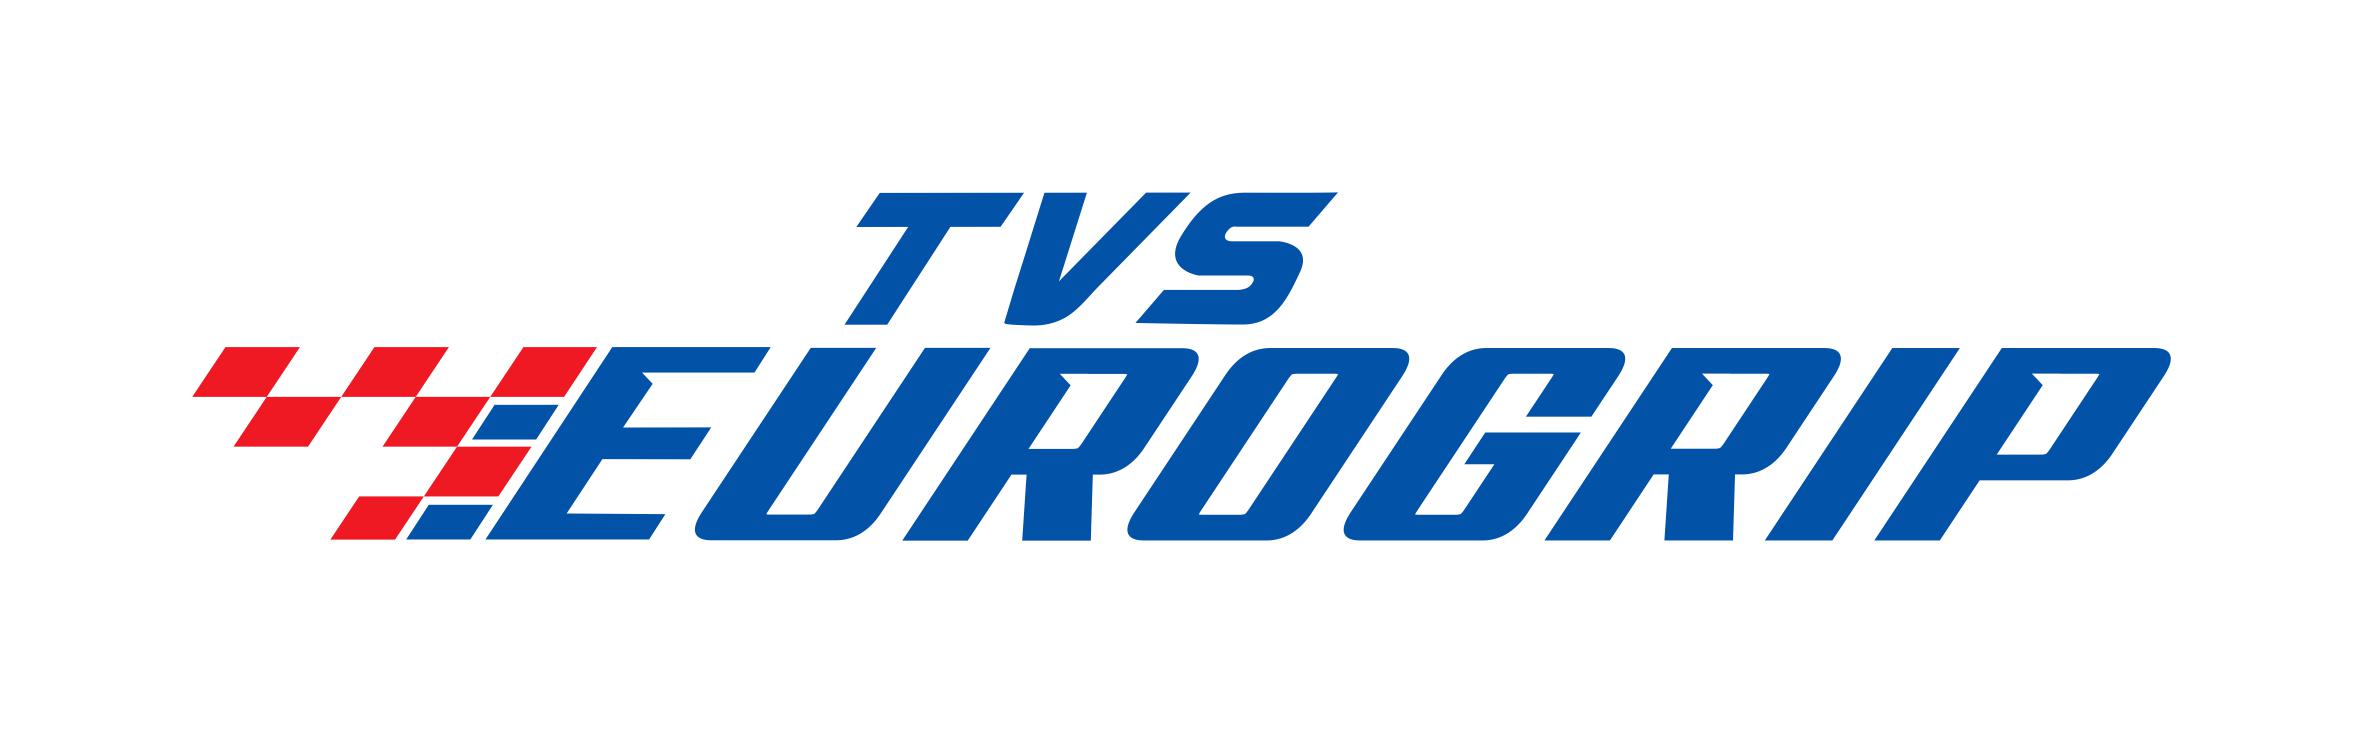 tvs-eurogrip-celebrates-independence-day-with-a-difference